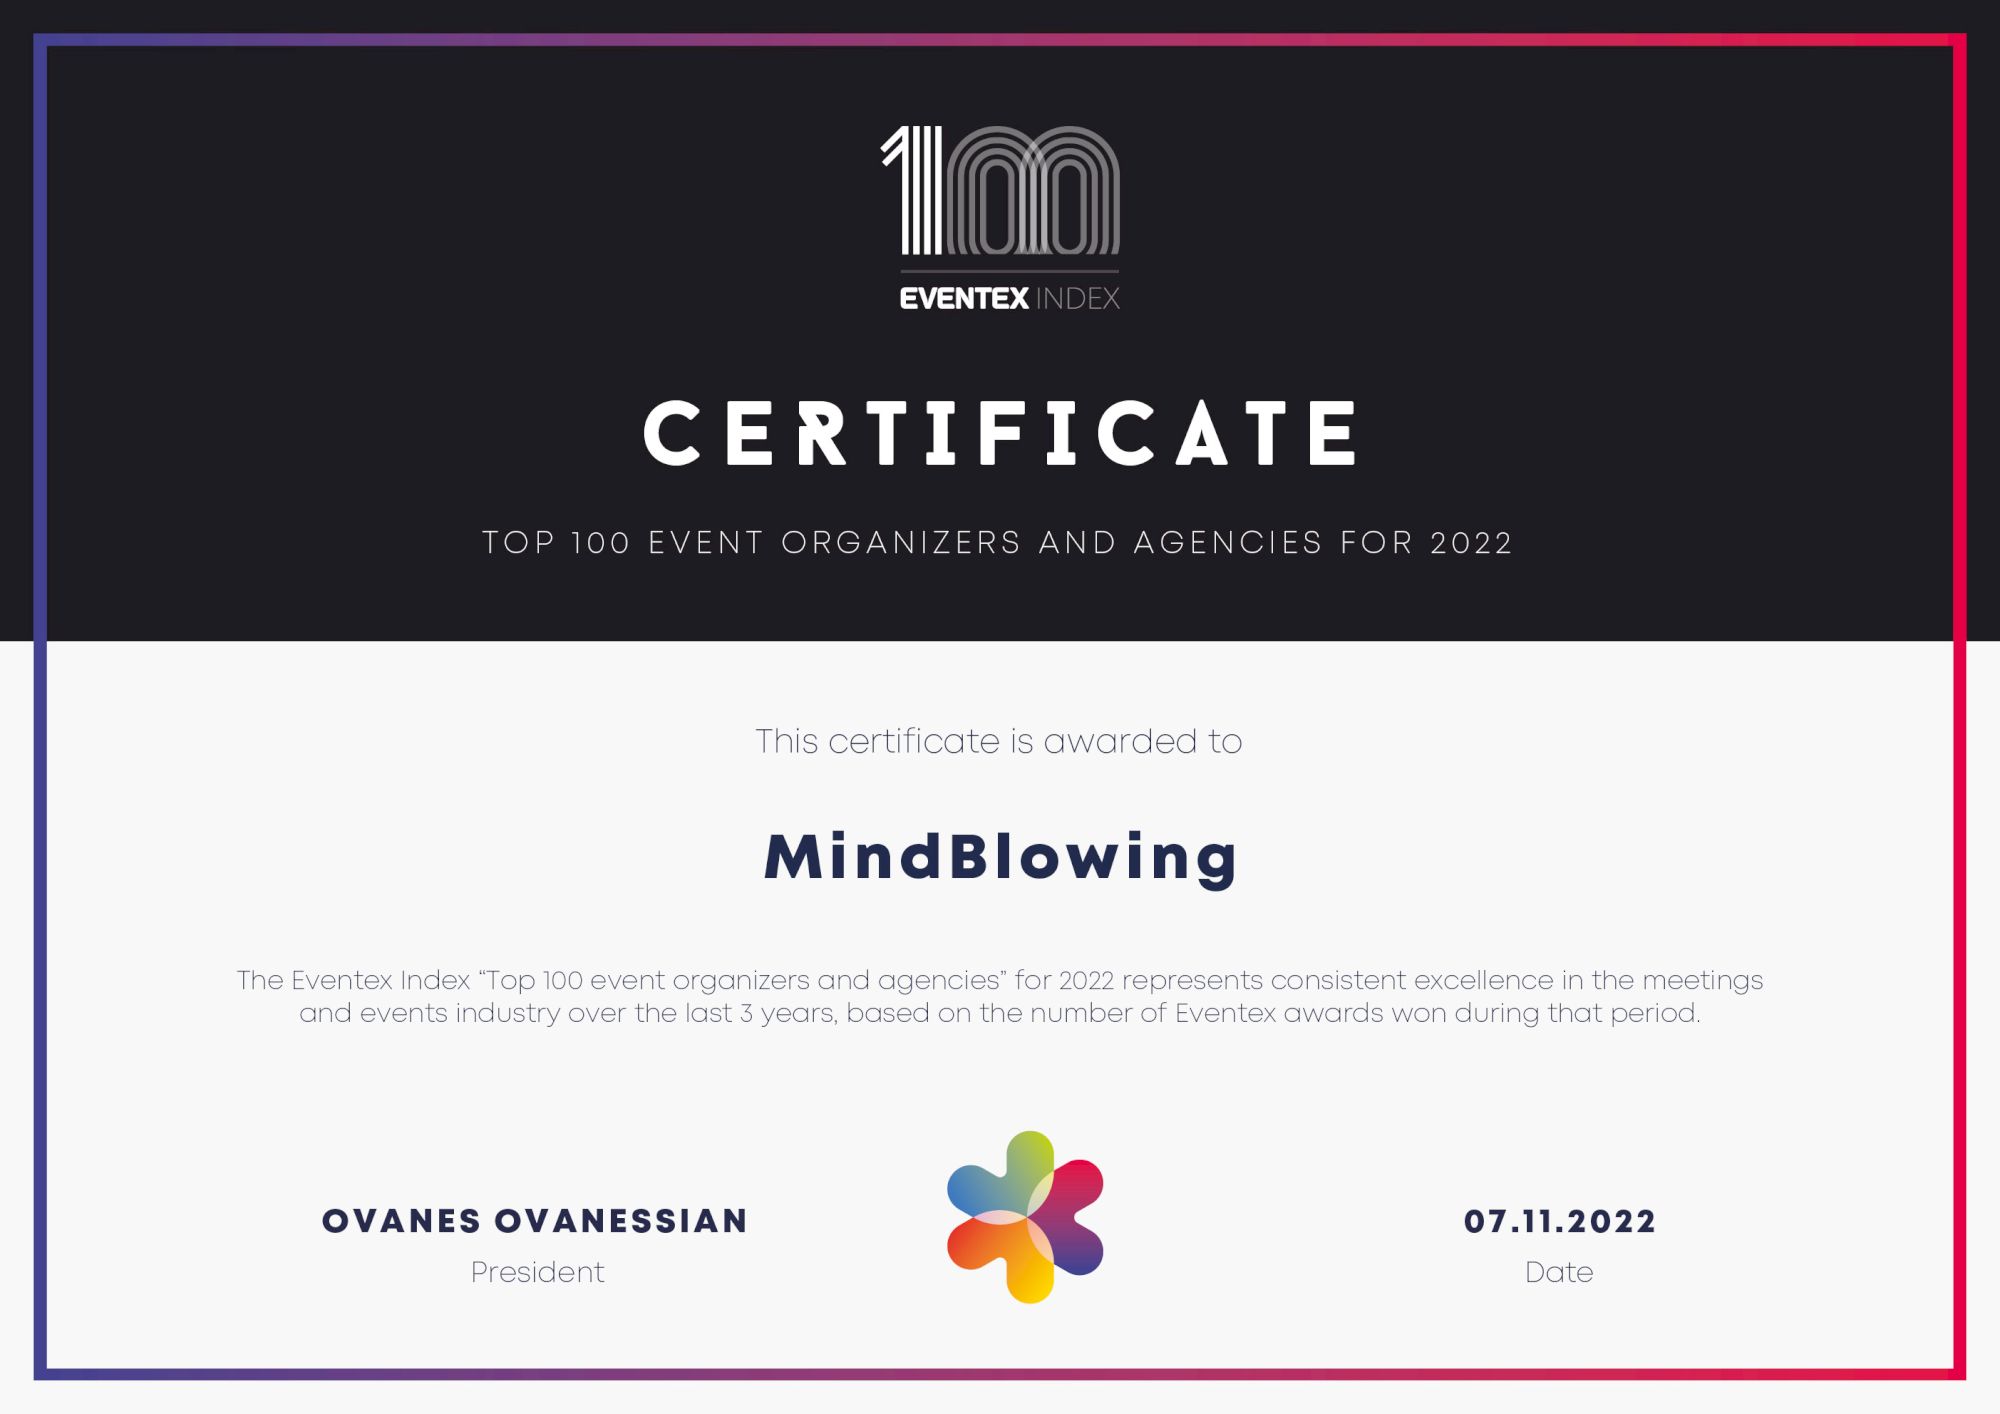 MindBlowing is one of the top 100 event organizers and agencies in 2022